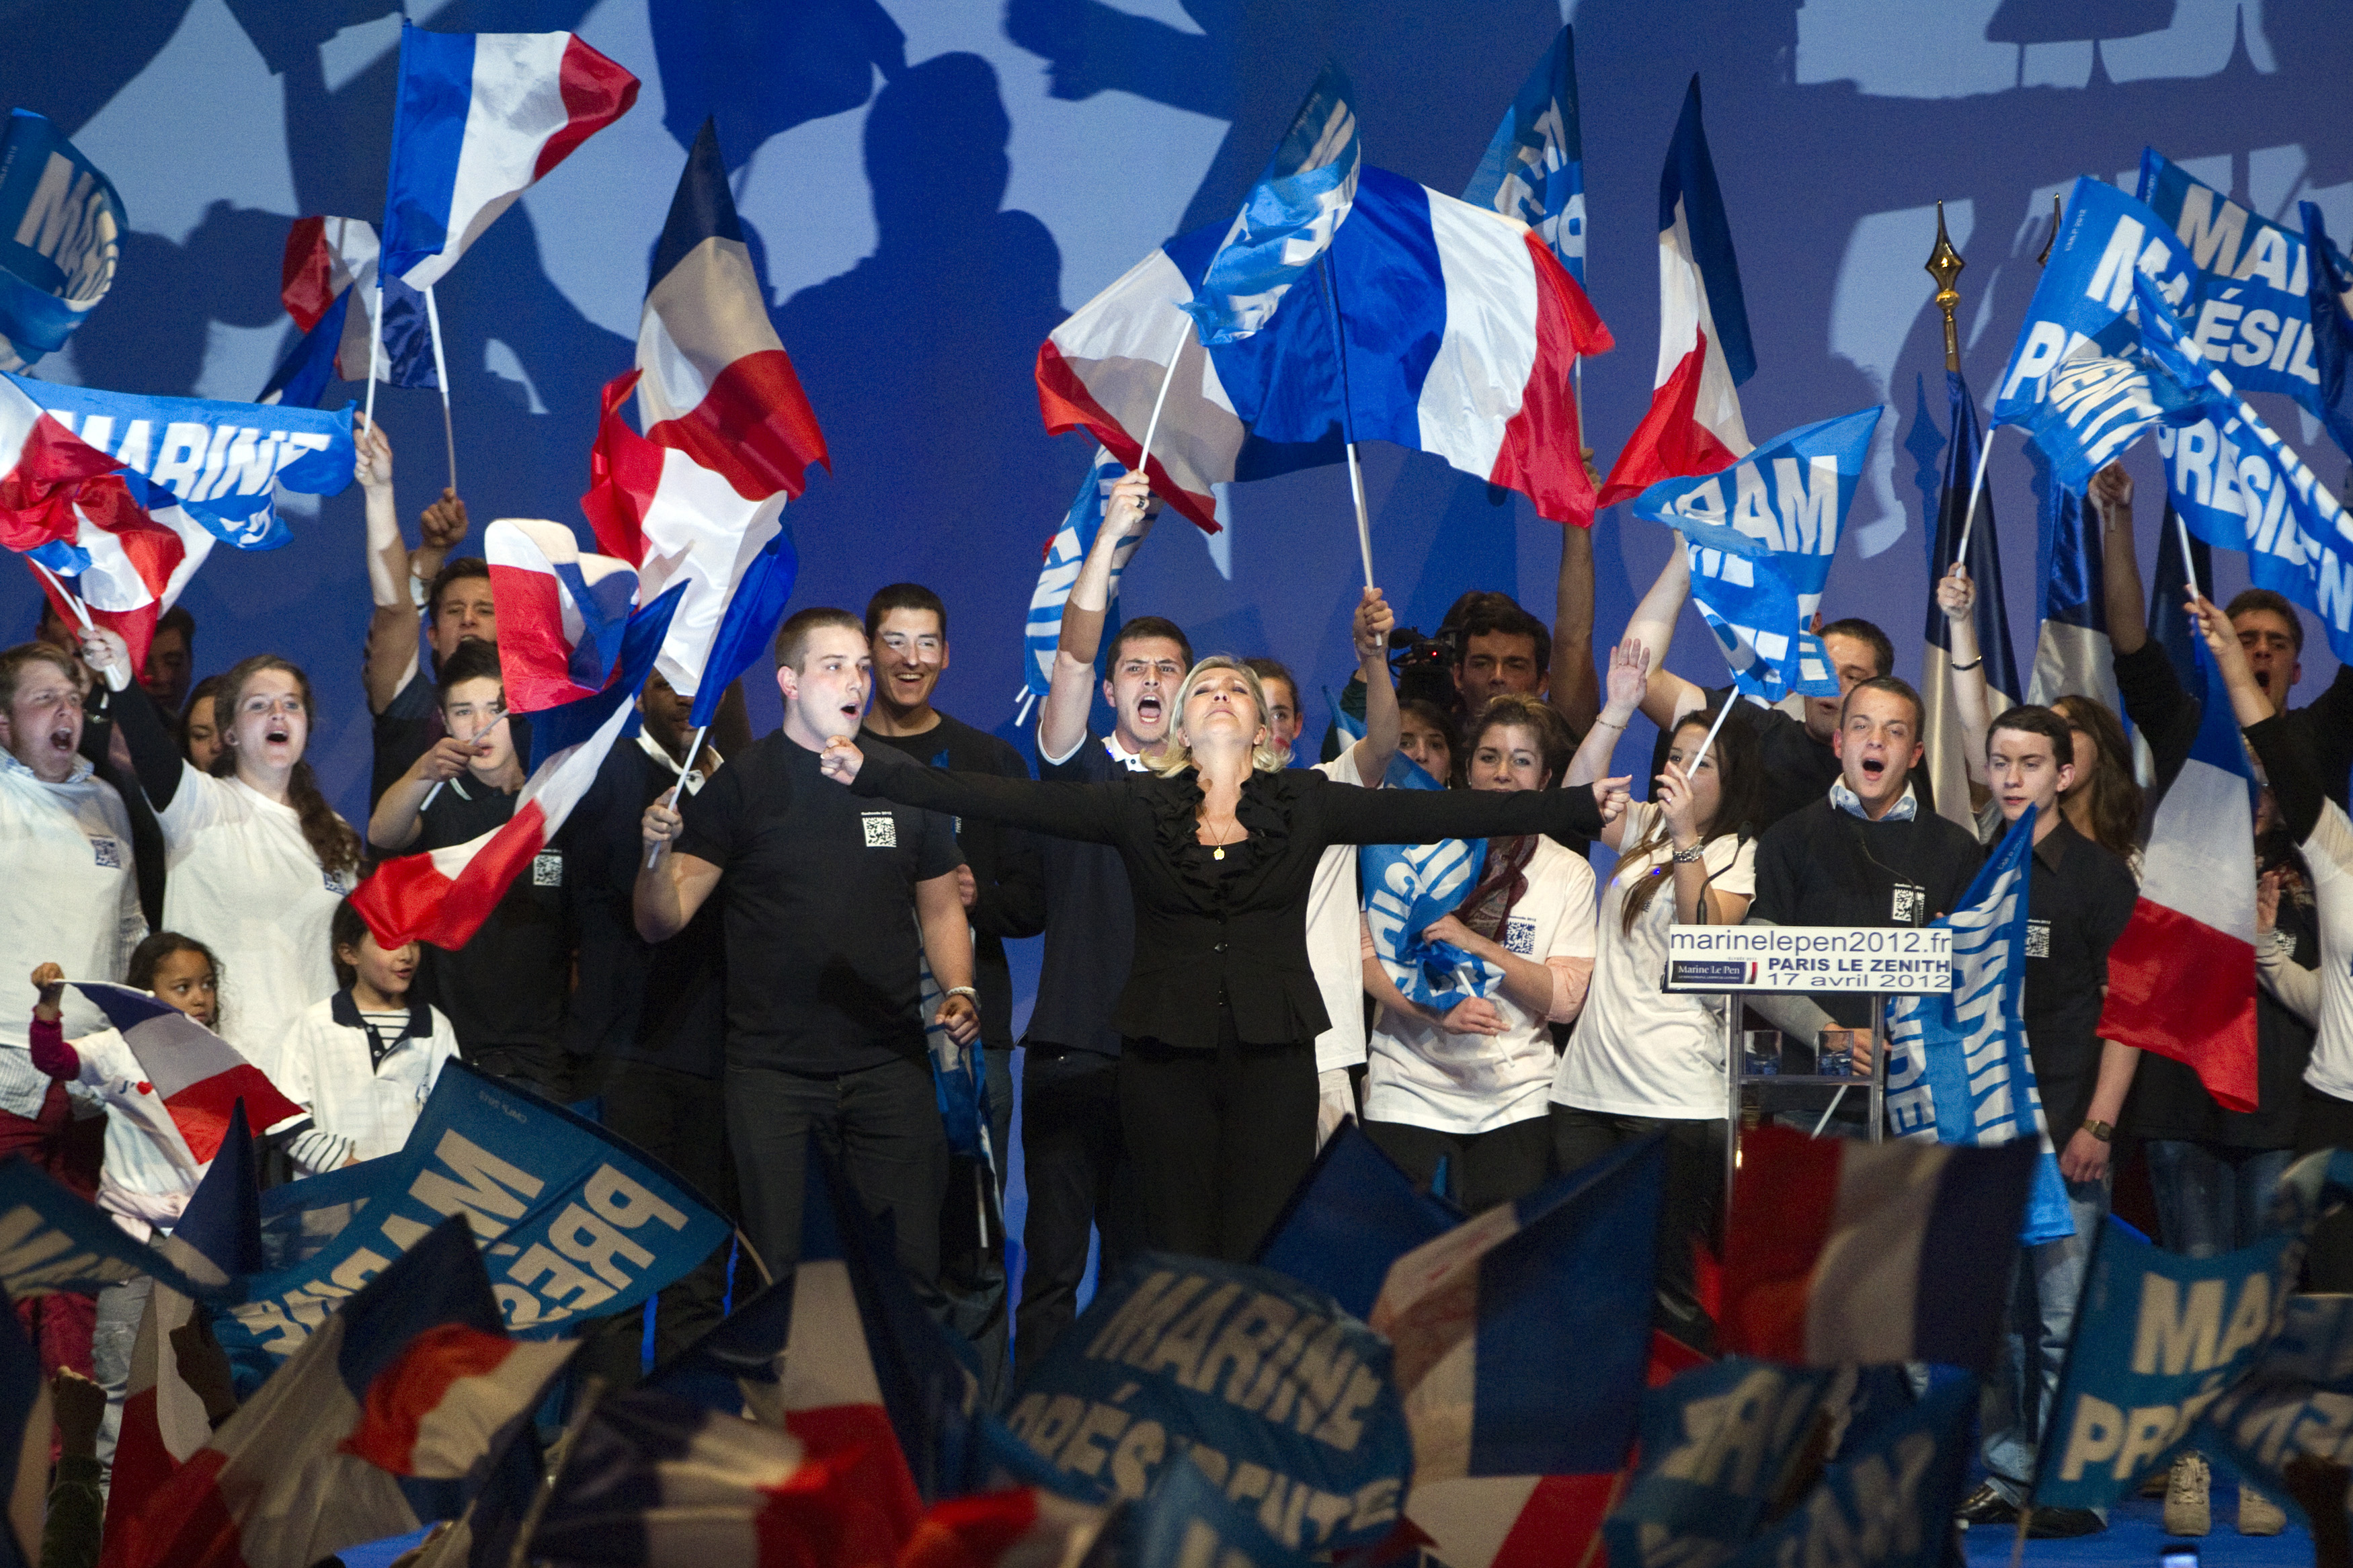 Marine Le Pen and her supporters sing the French national anthem.